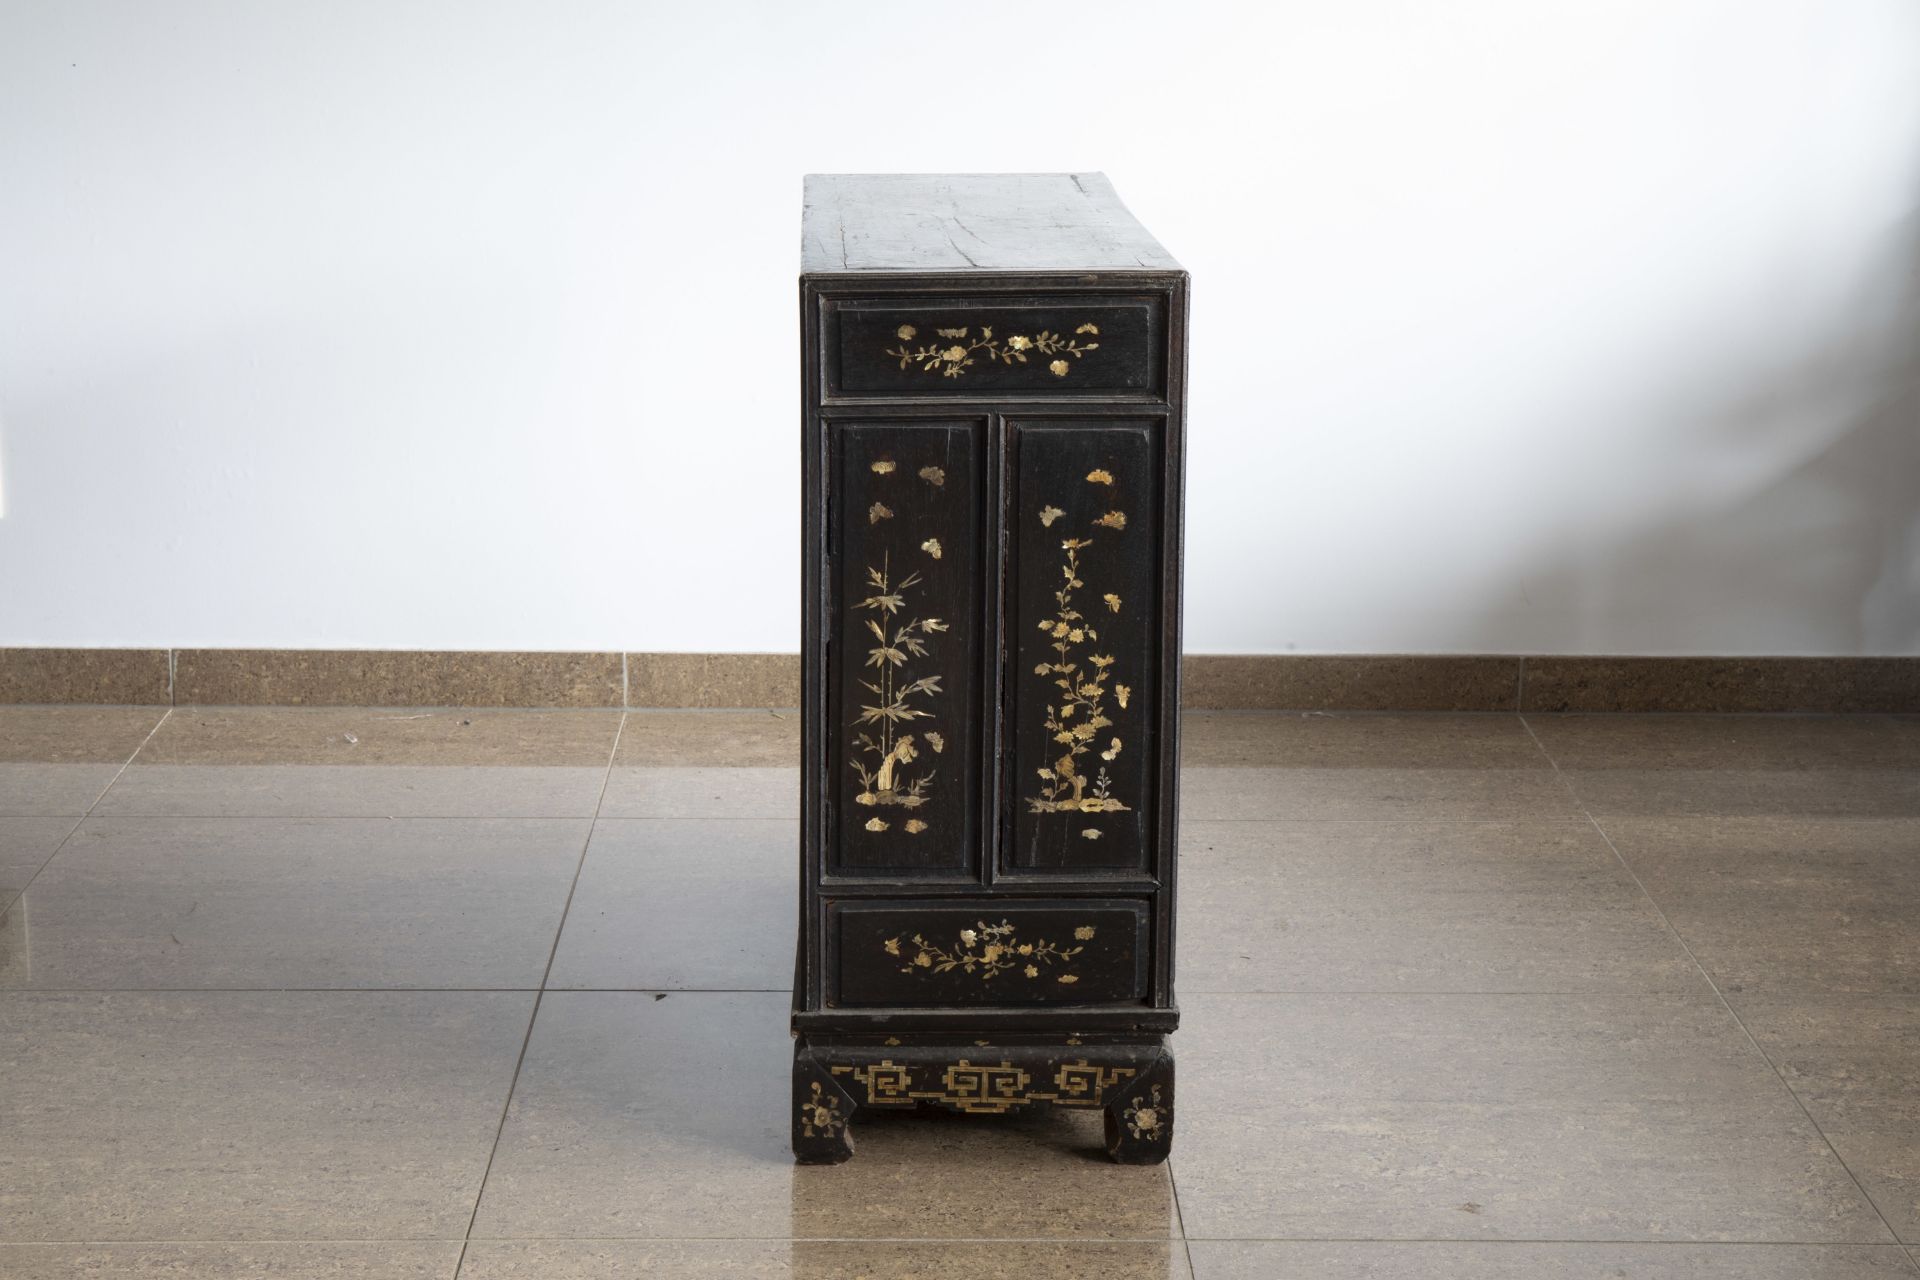 A Vietnamese mother-of-pearl inlaid wood two-door cabinet with figures in a palace garden and floral - Image 6 of 8